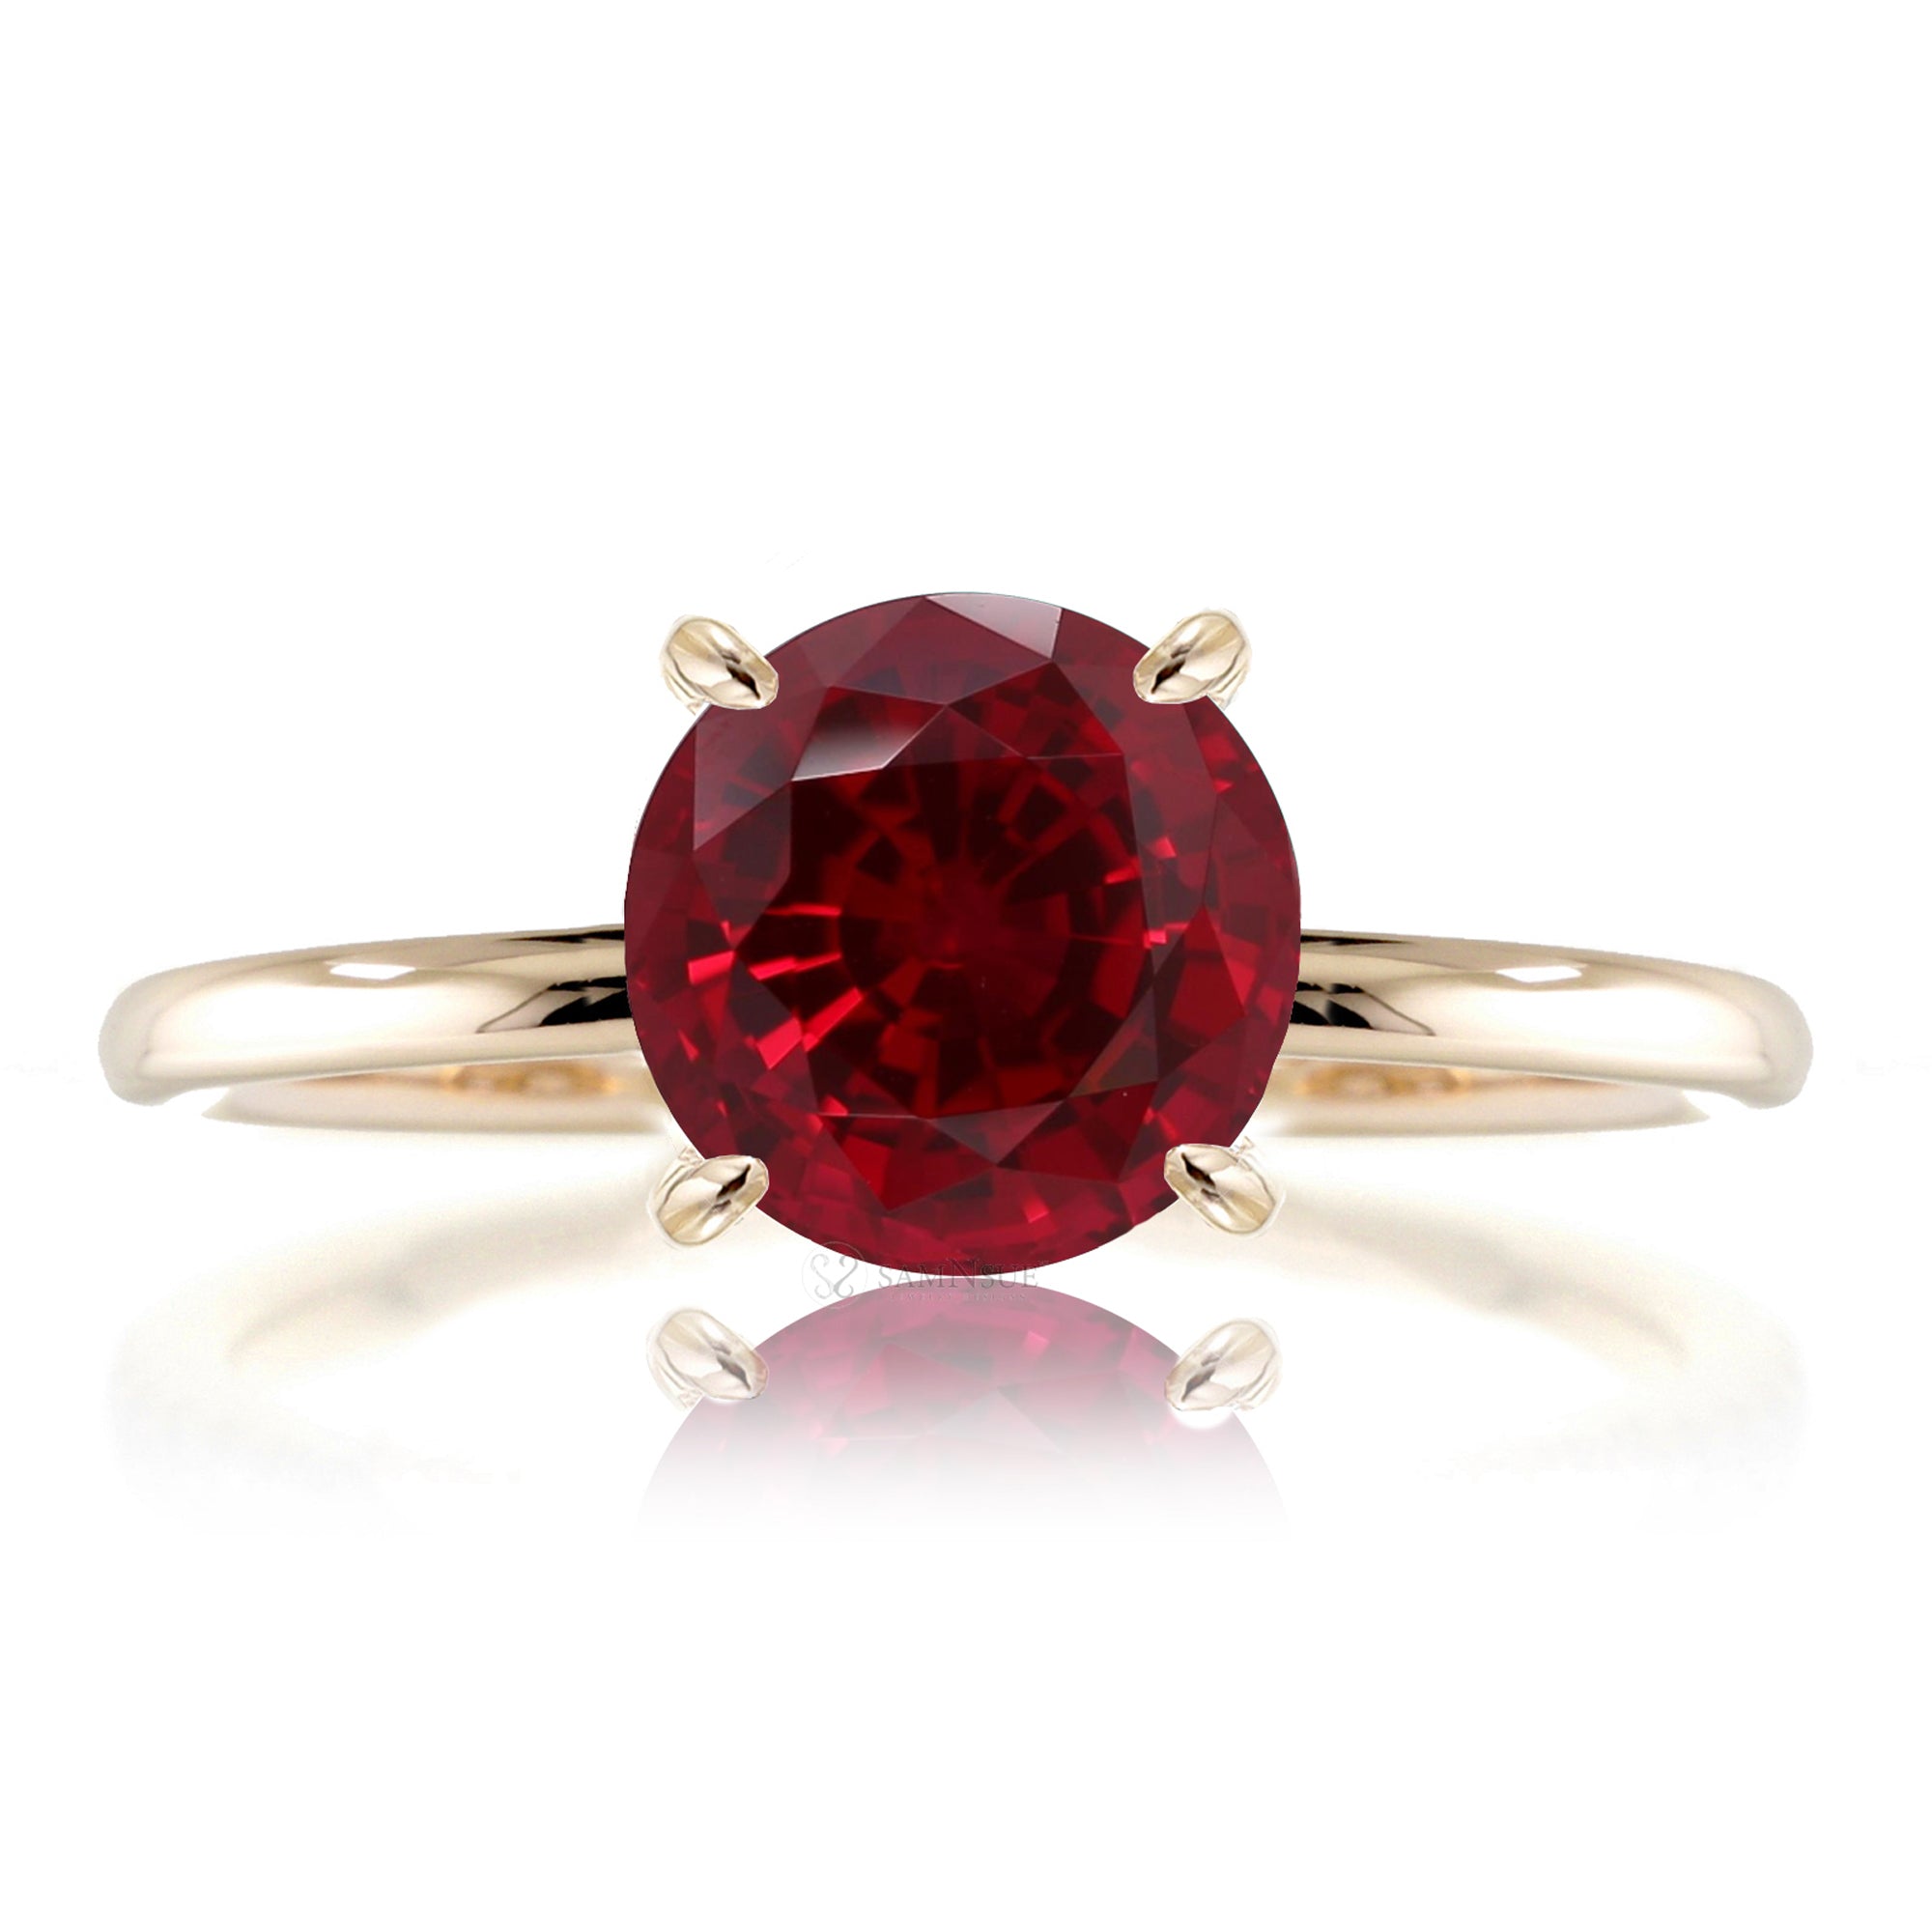 Round cut lab ruby engagement ring solid band yellow gold - the Ava